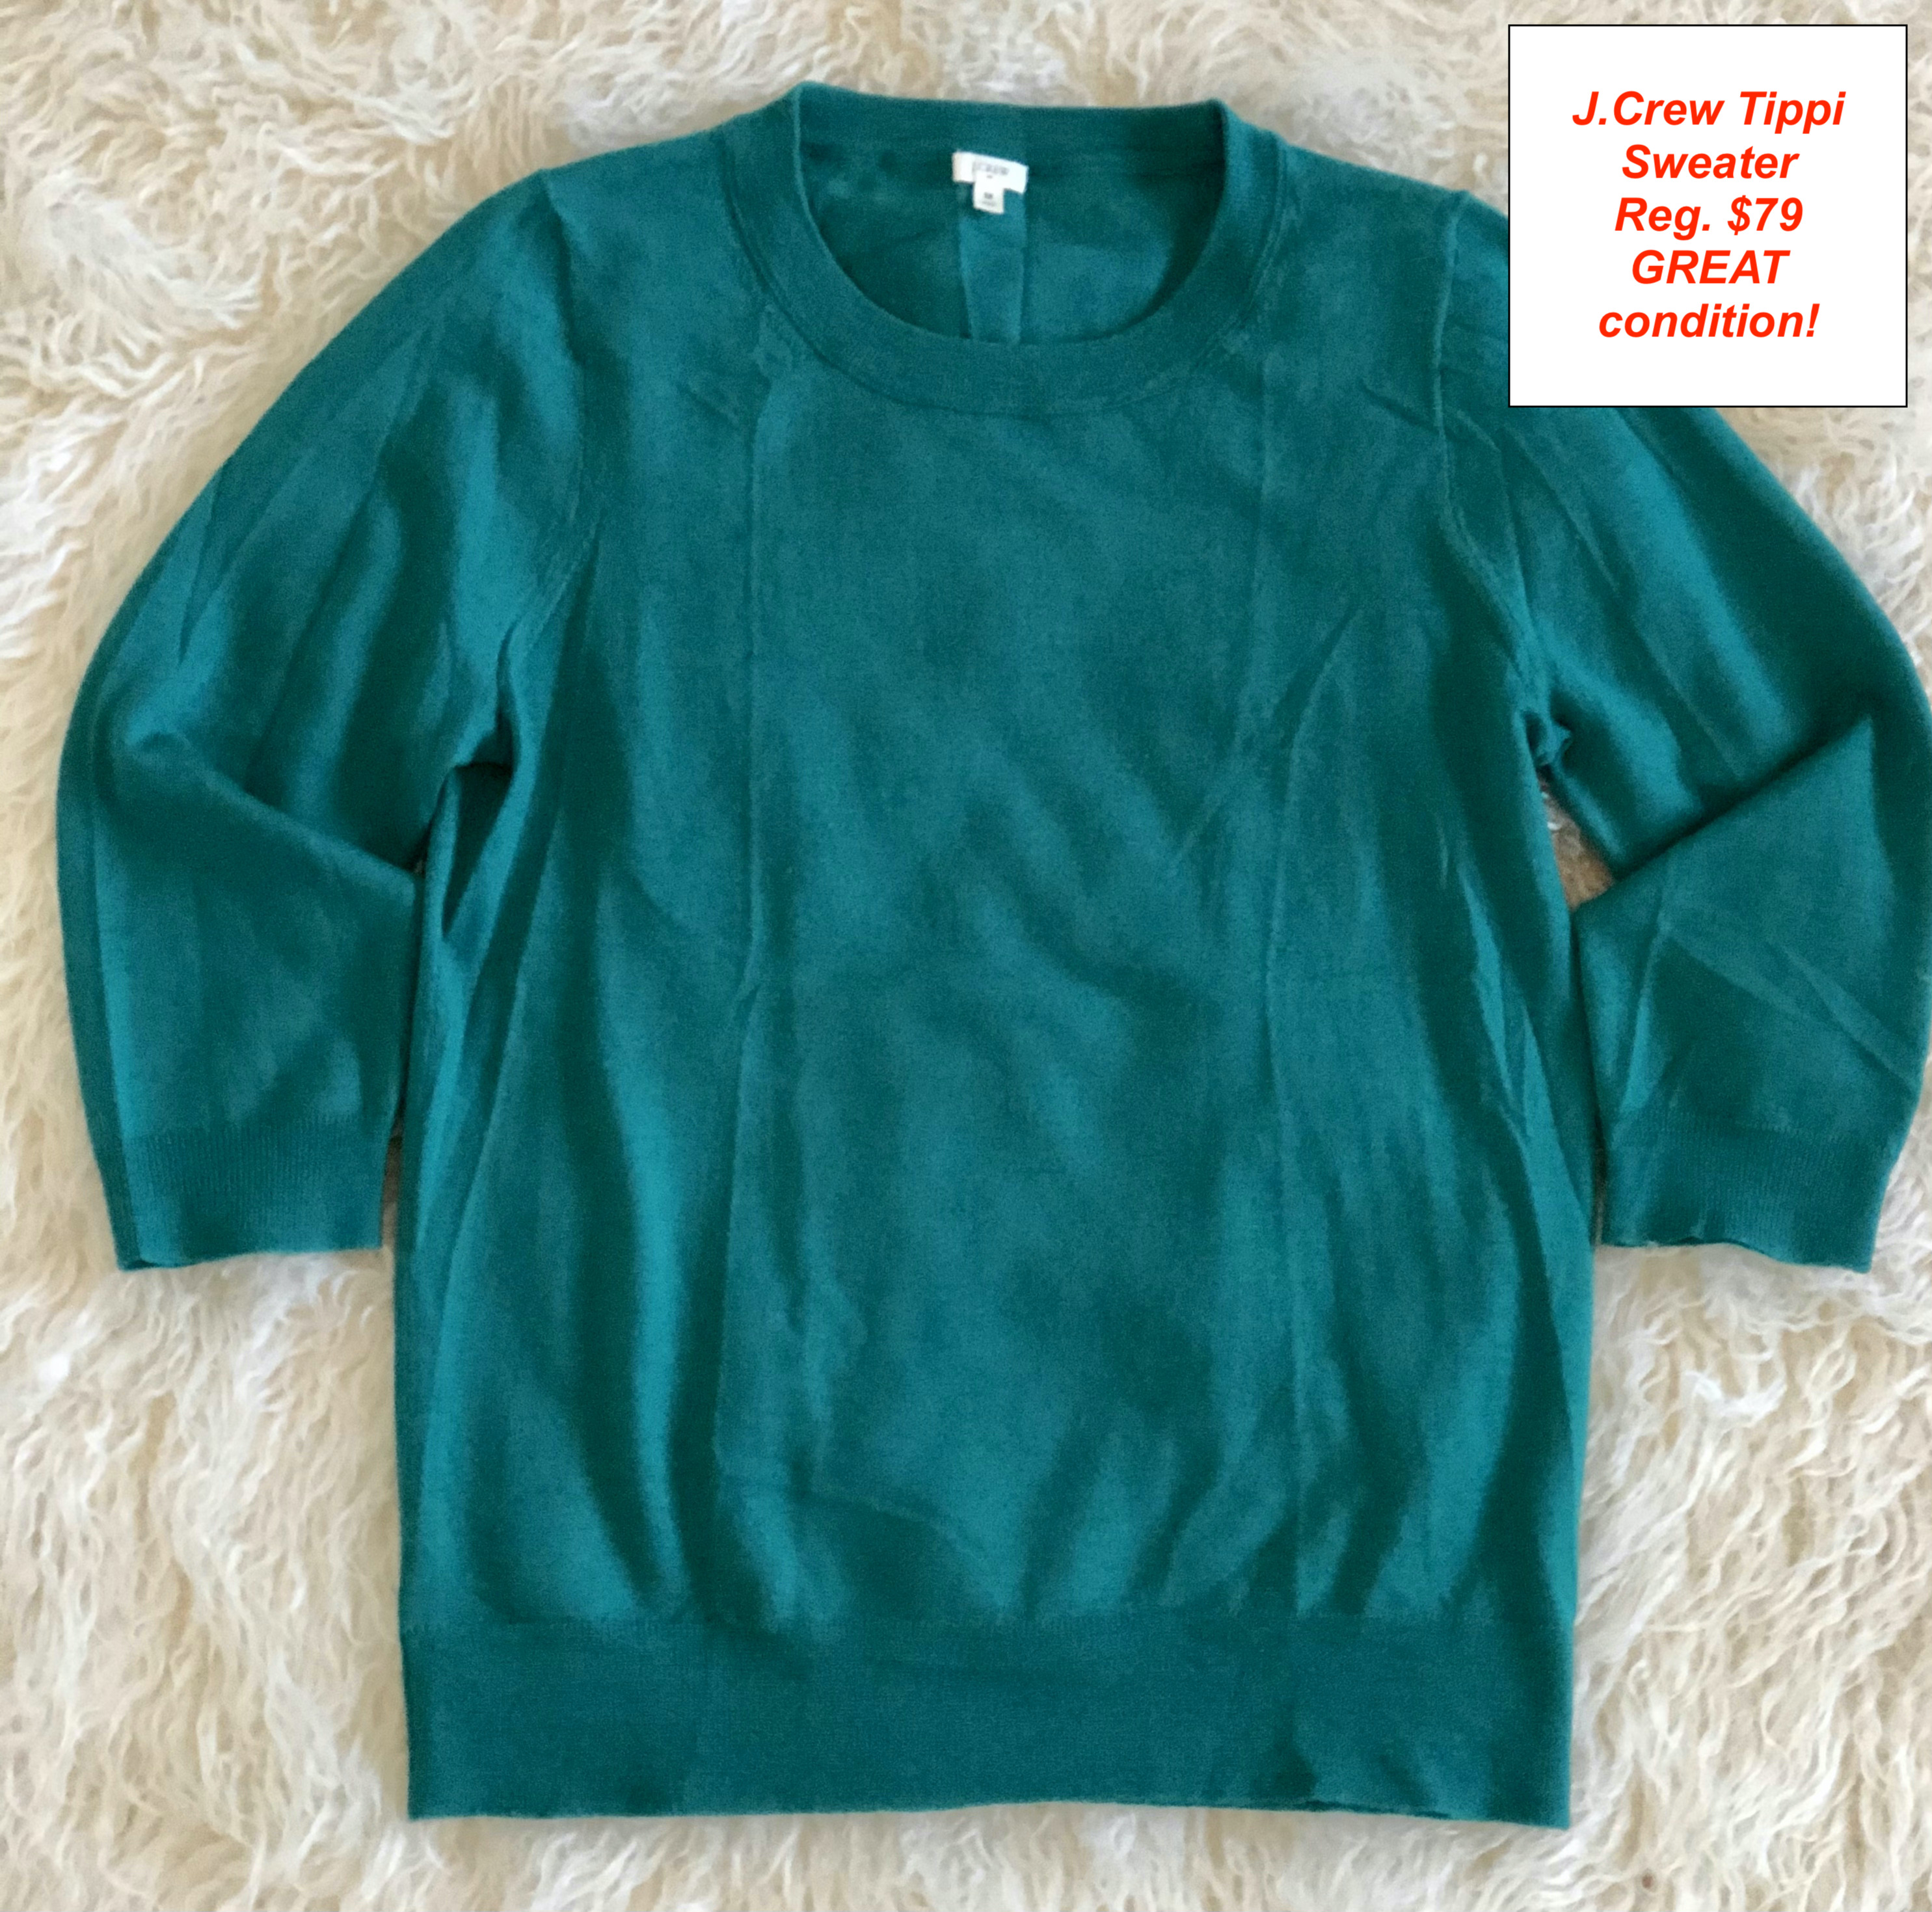 sweater to sell on ebay